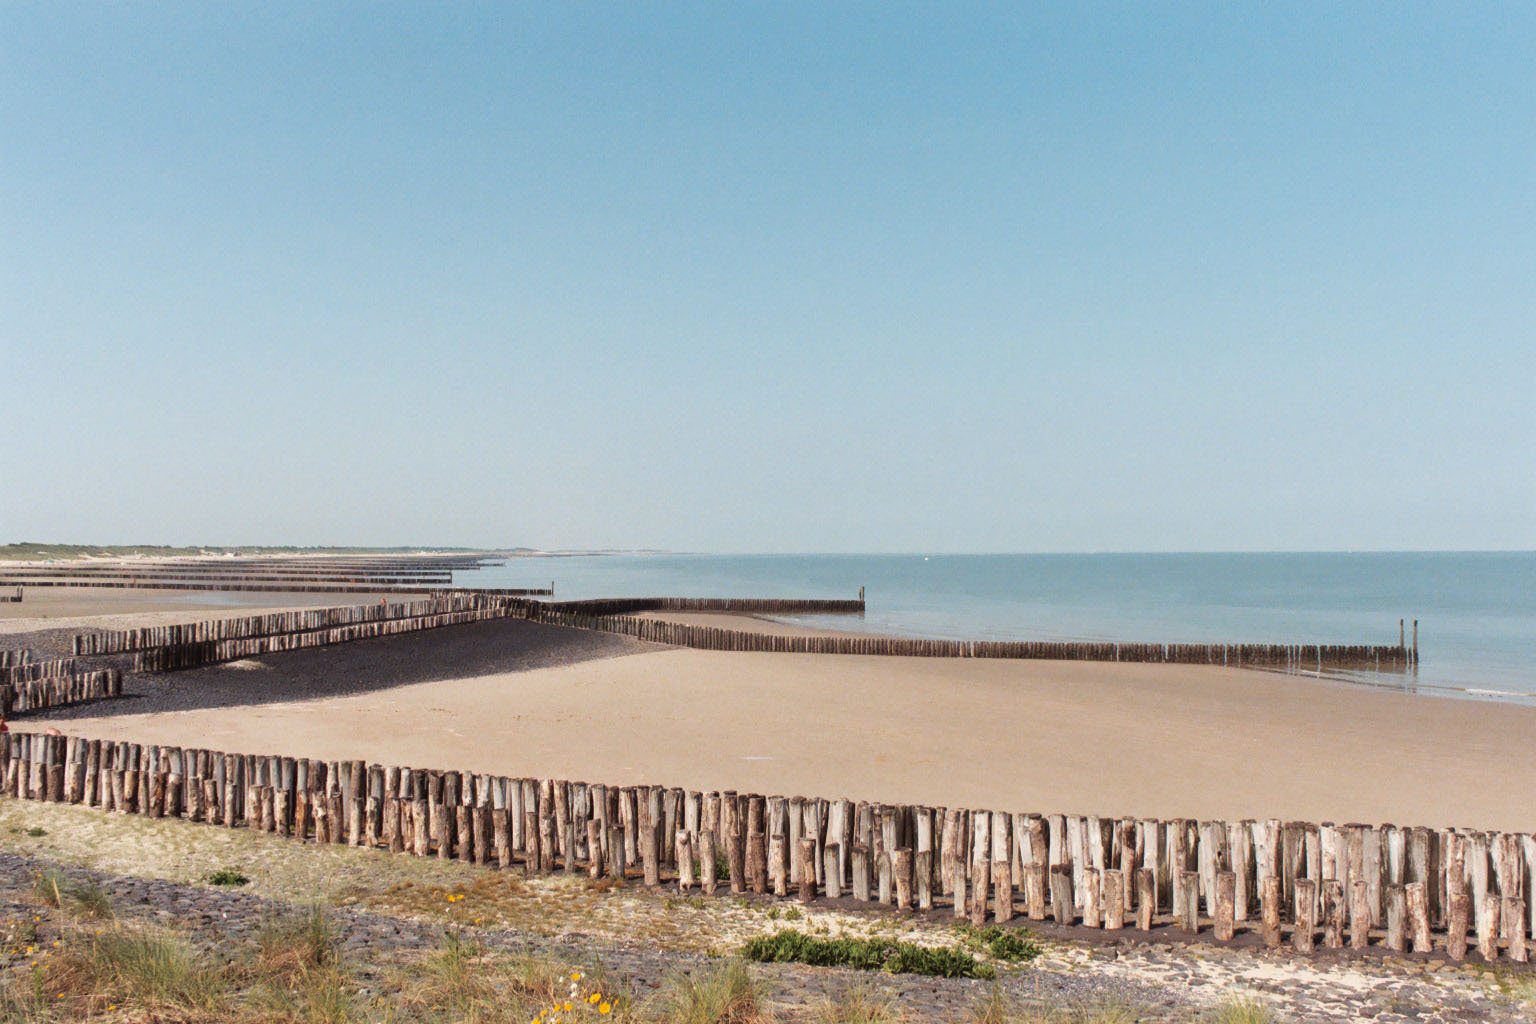 a long wooden fence at the ocean's edge